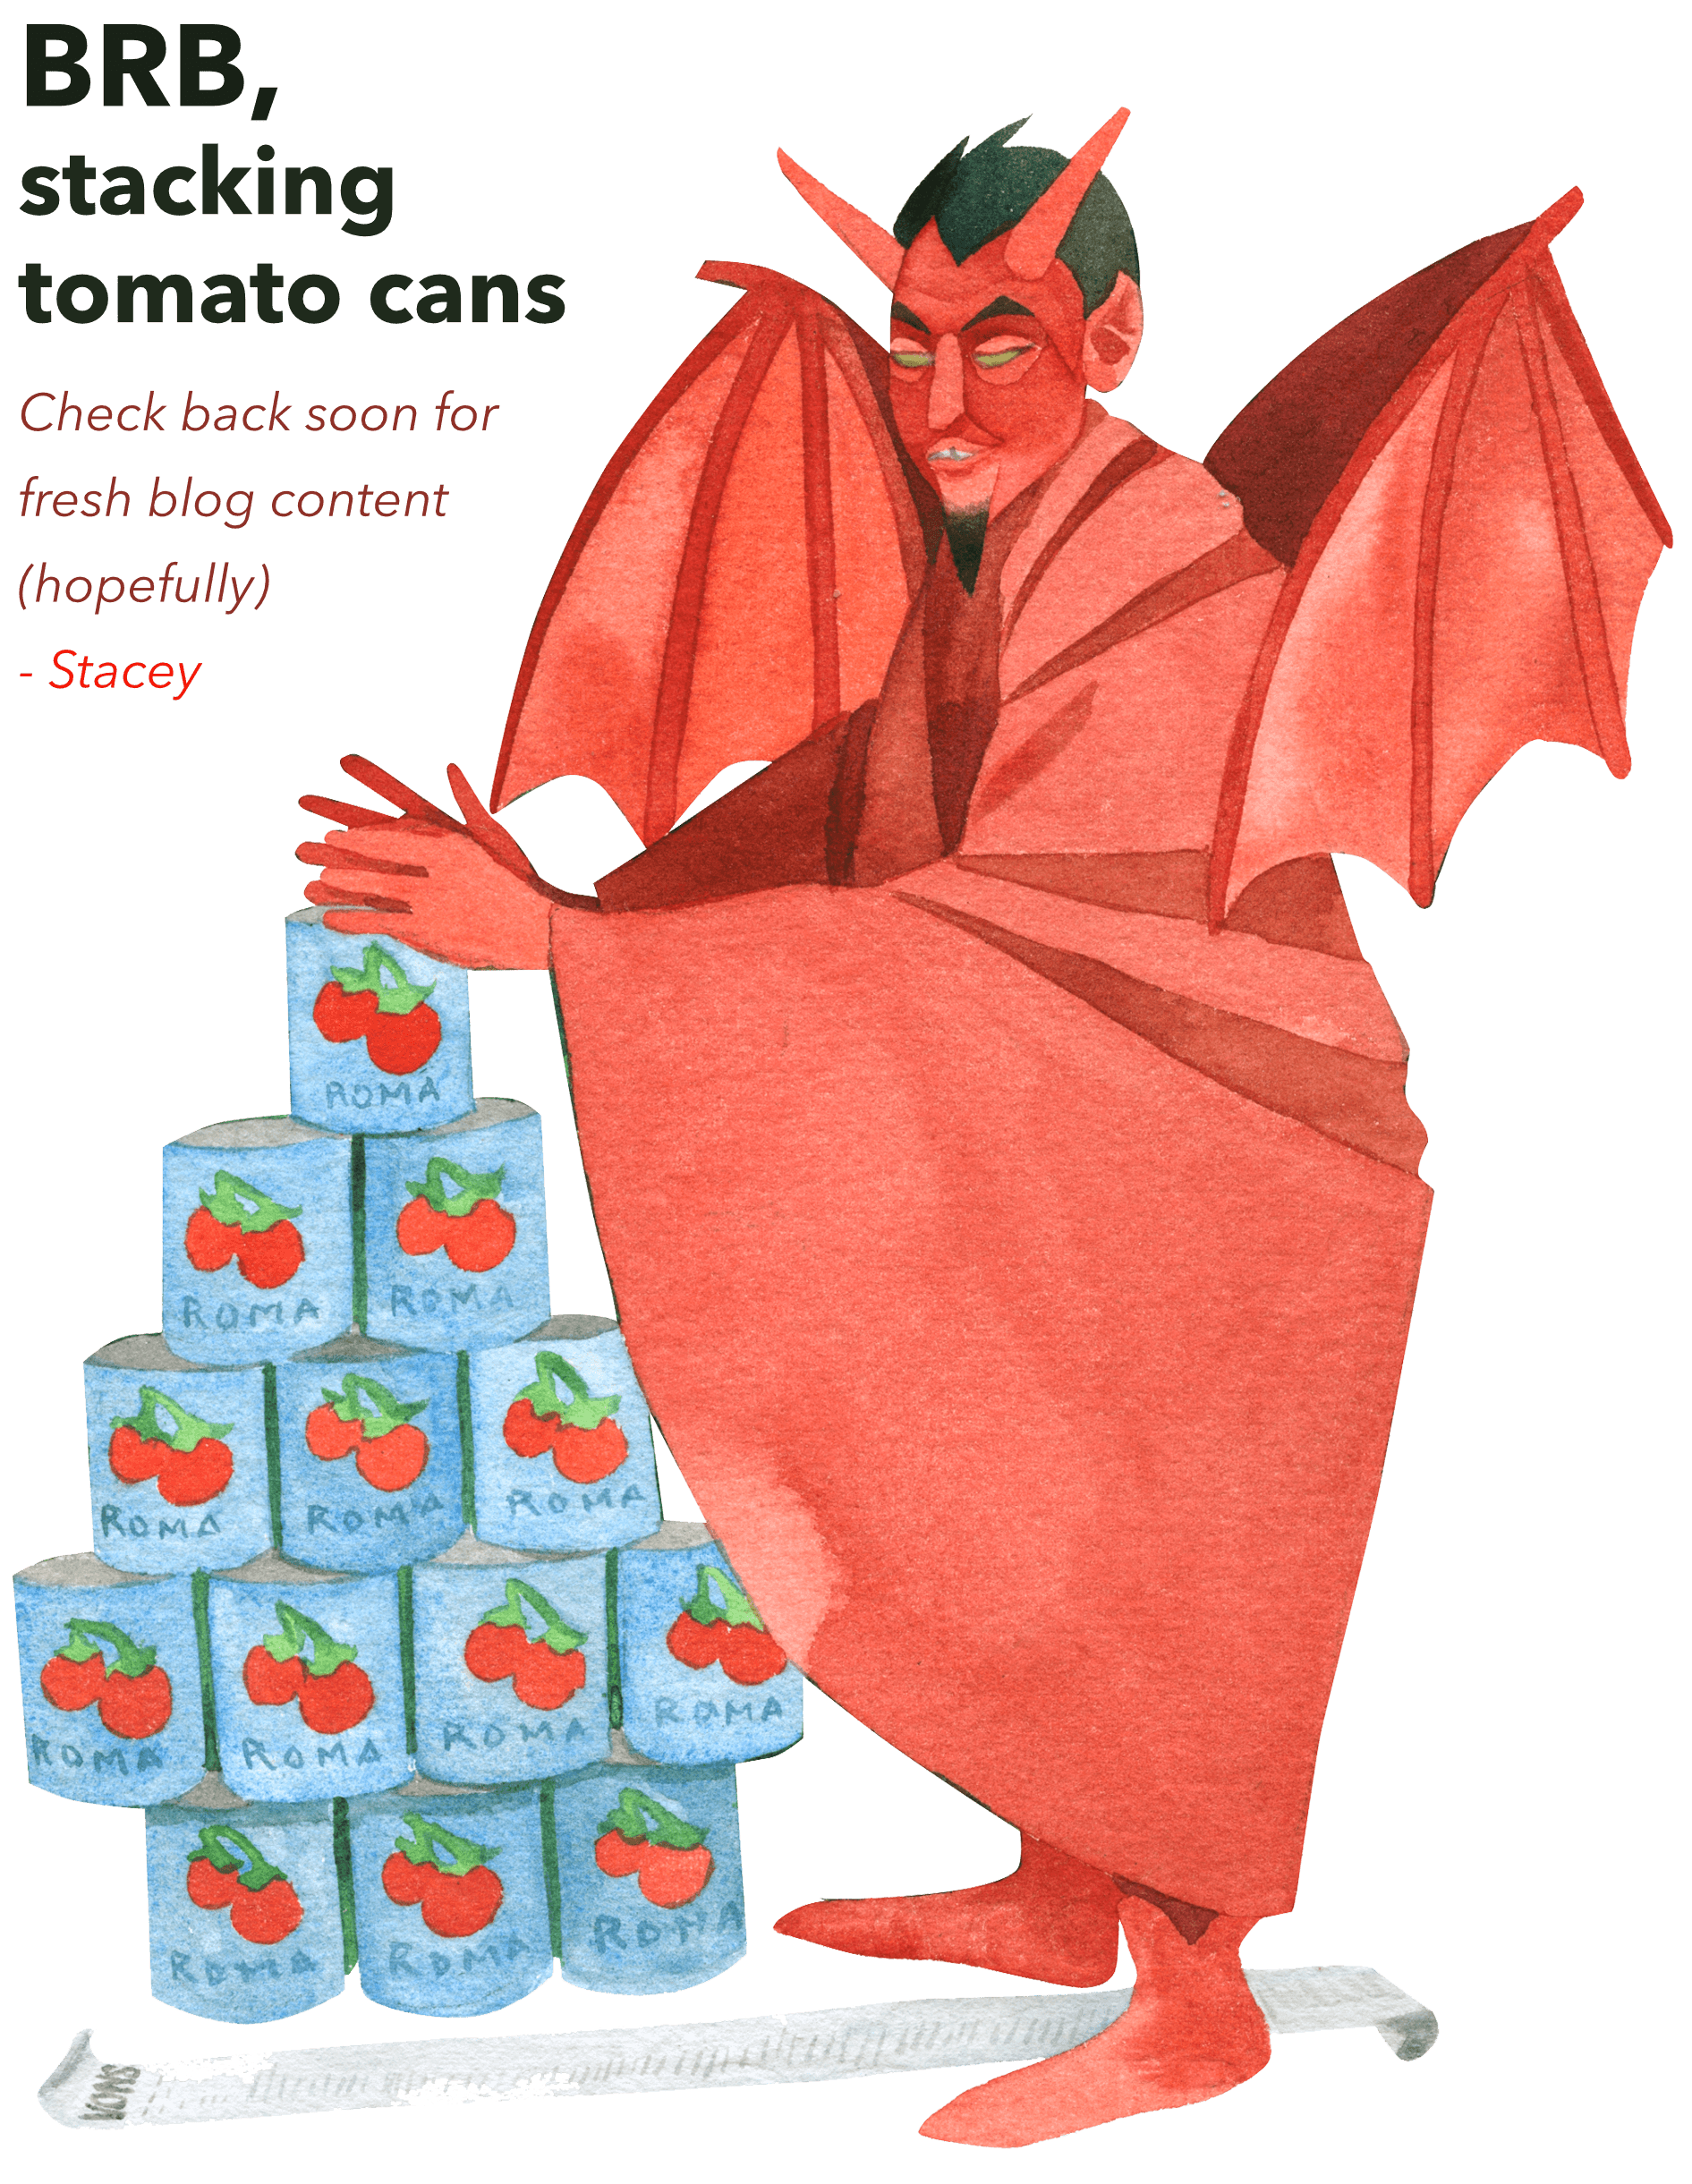 Devil stacking tomato cans